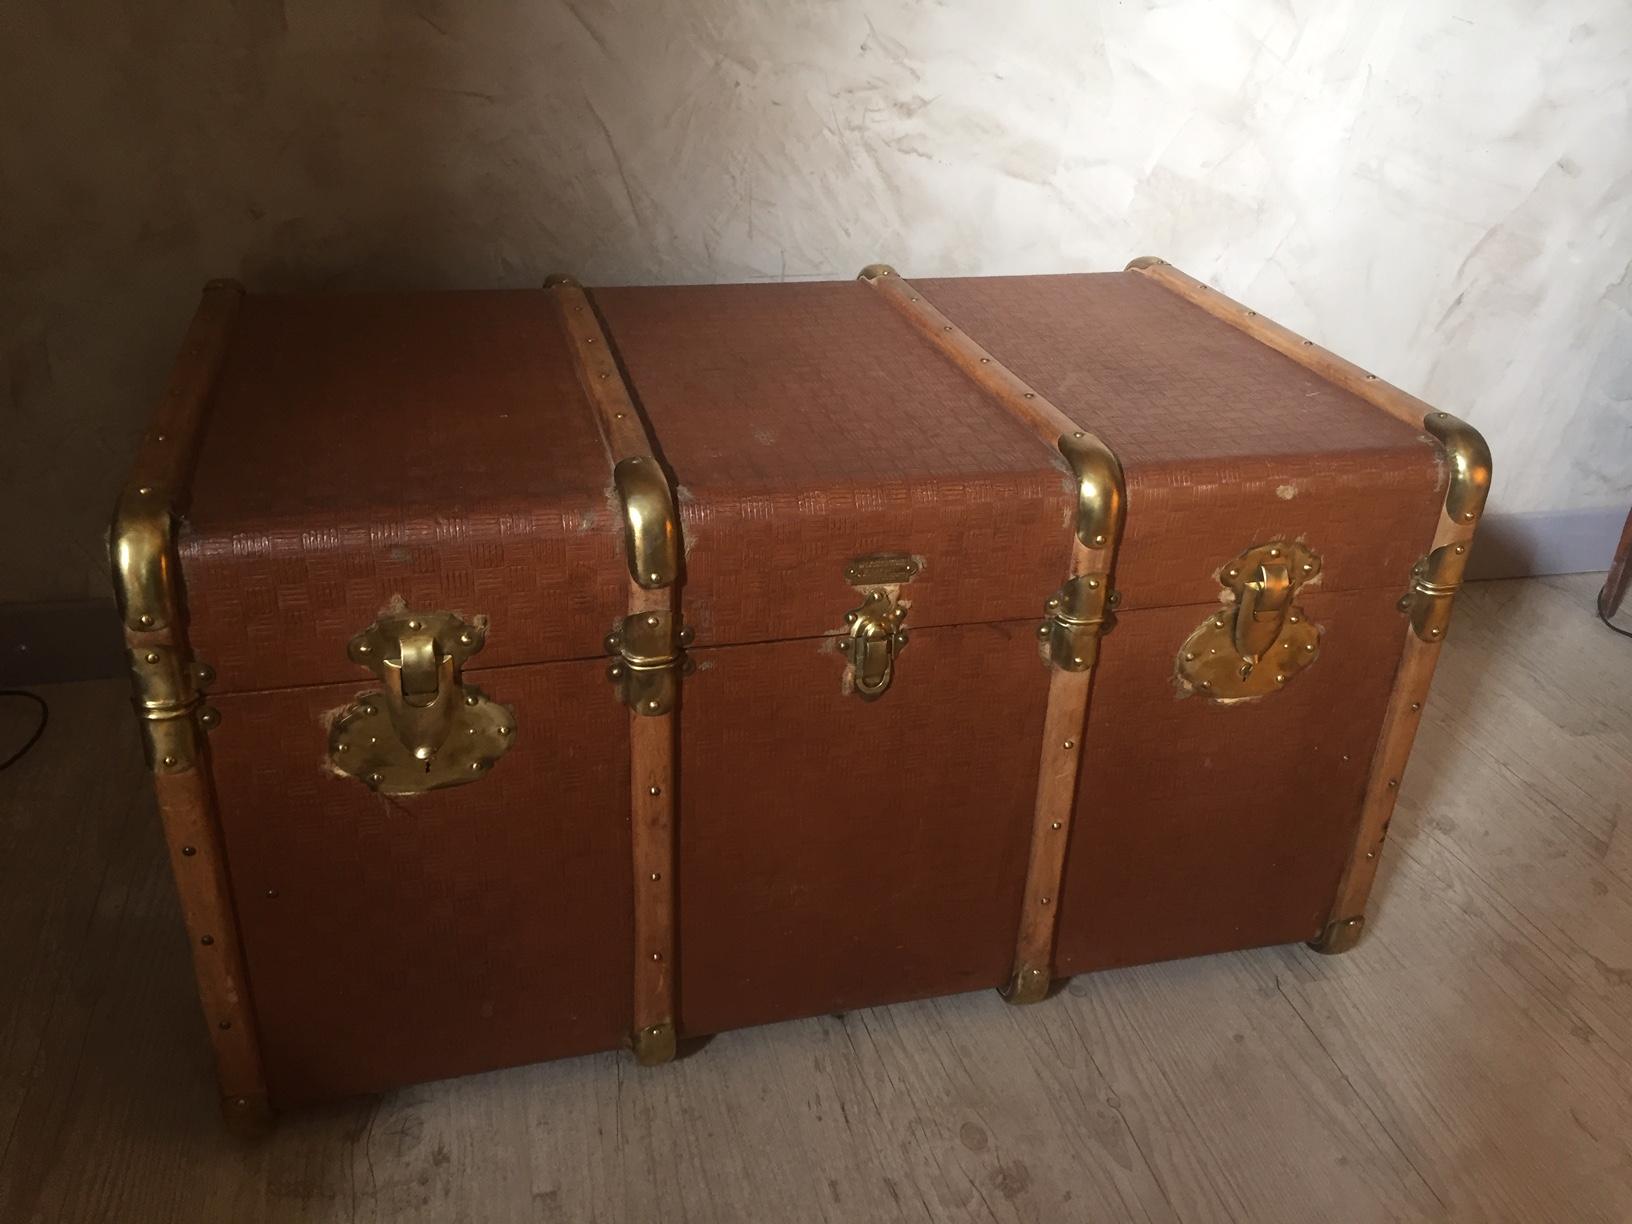 Beautiful 20th century French wooden travel trunk from the 1930s. 
Original upholstery on the inside. gilded brass fittings. Leather handles. 
Good quality and condition.